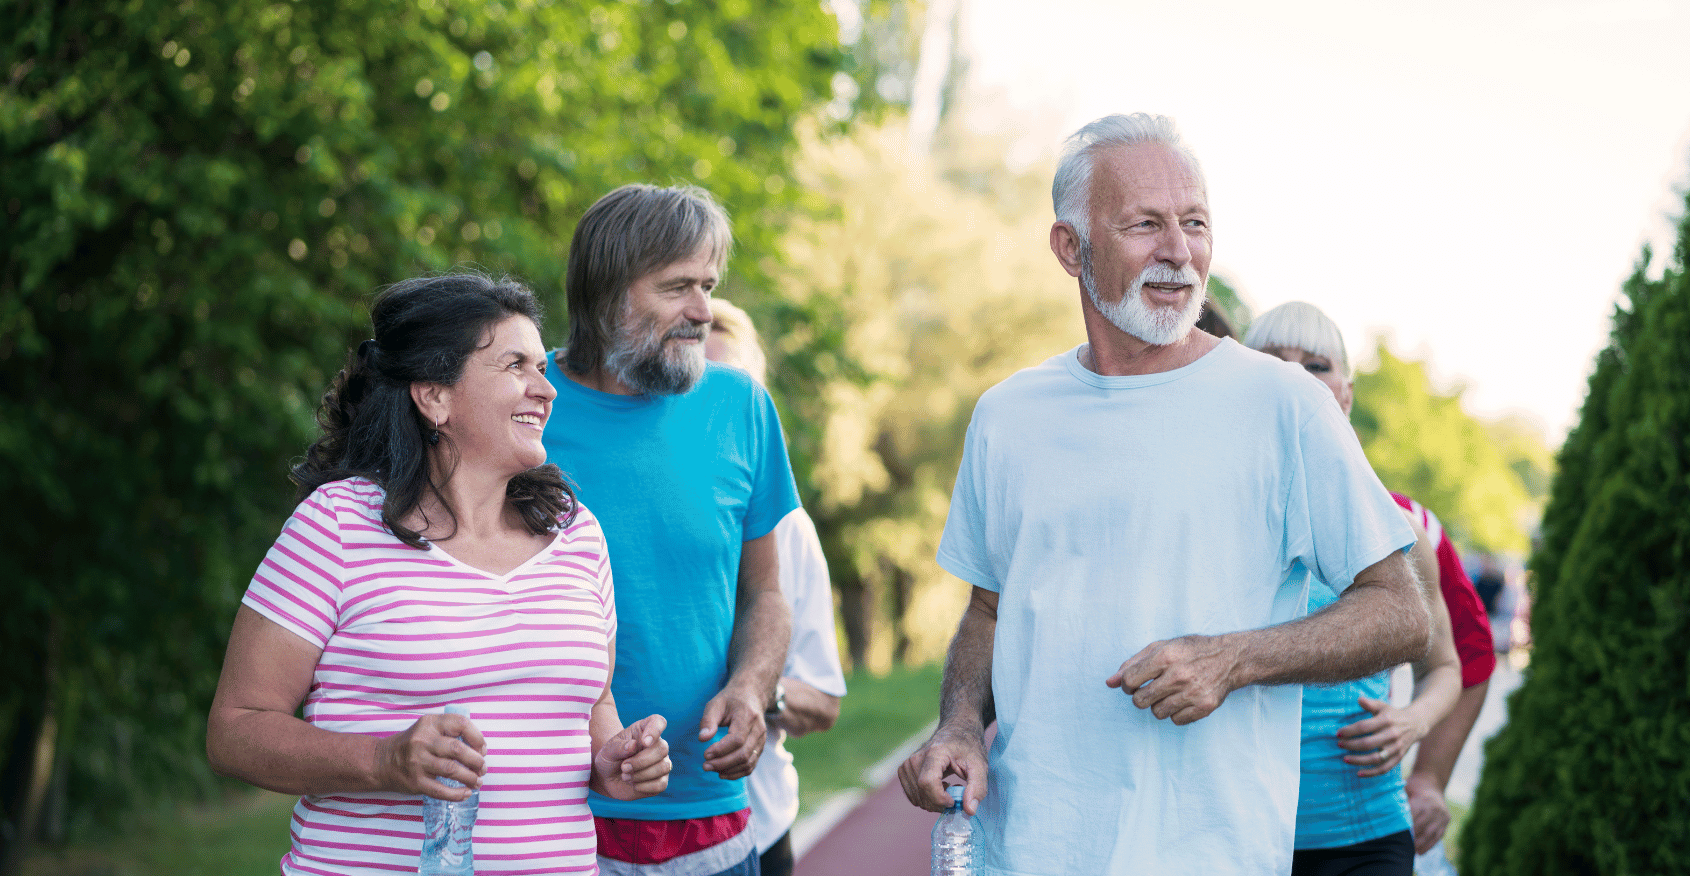 A group of older adults smiling while on a jogging path.